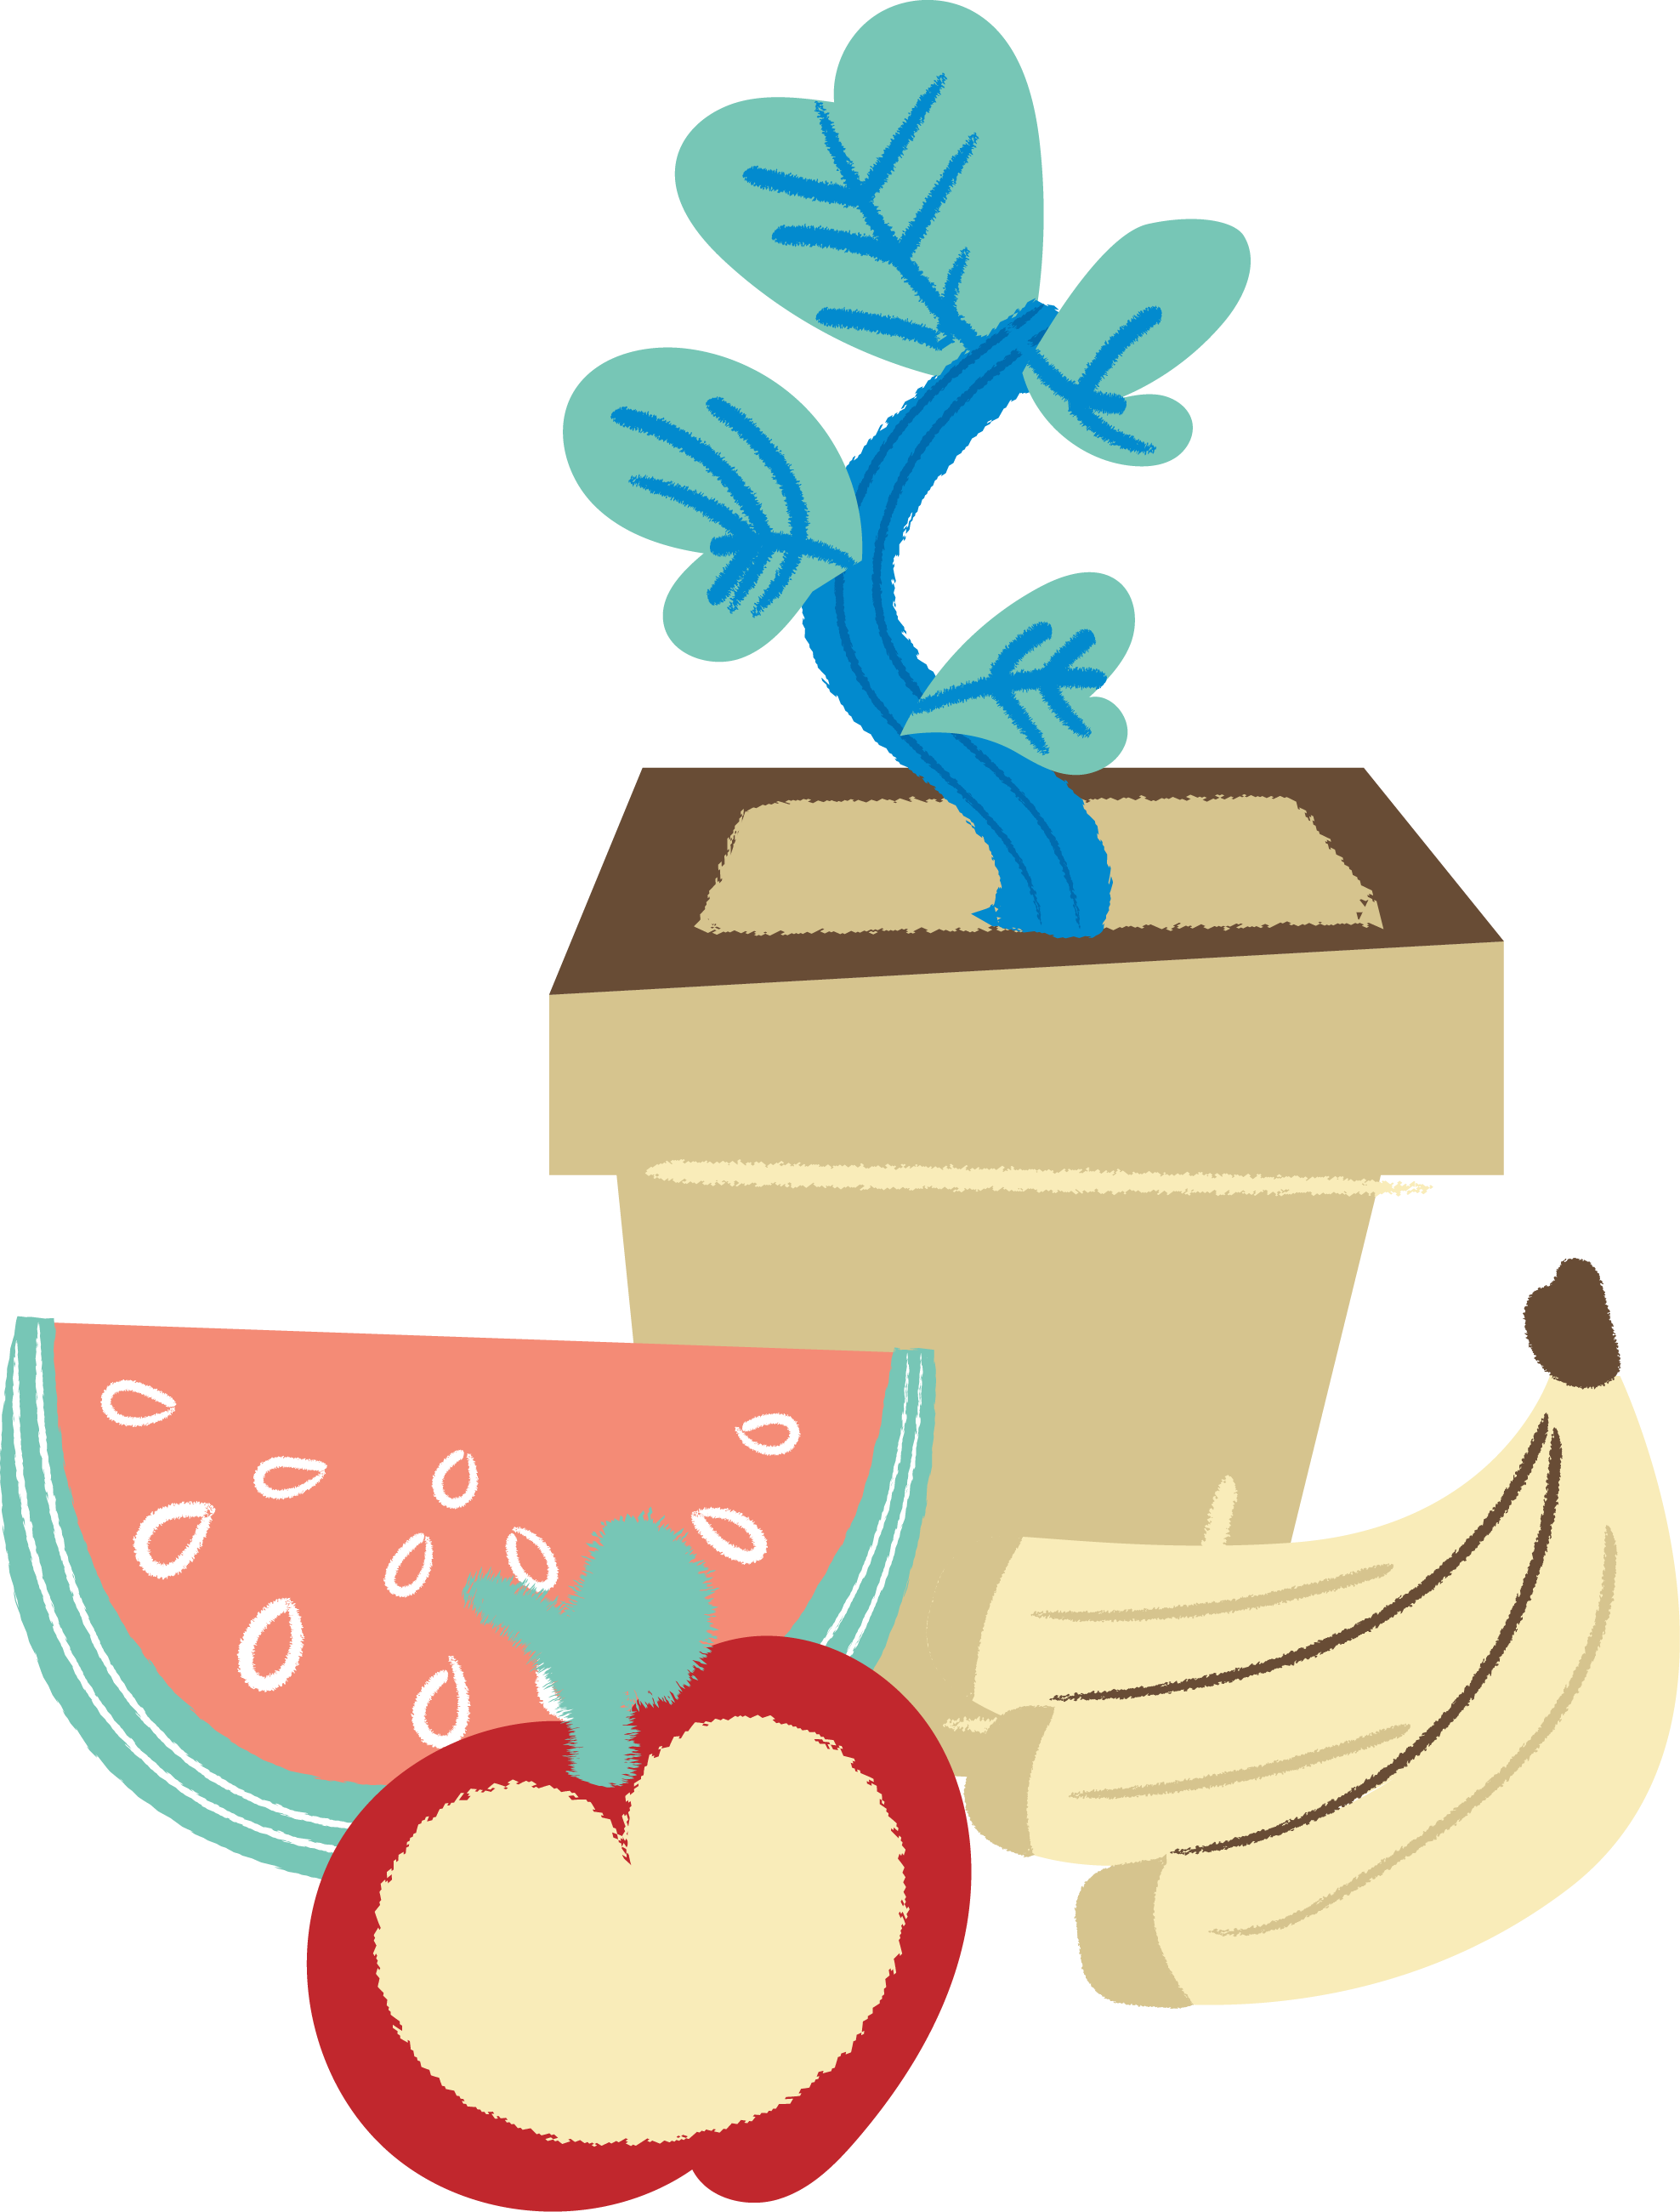 An illustration of a blue plant in a pot, with a watermelon slice, half an apple, and a bunch of bananas in front